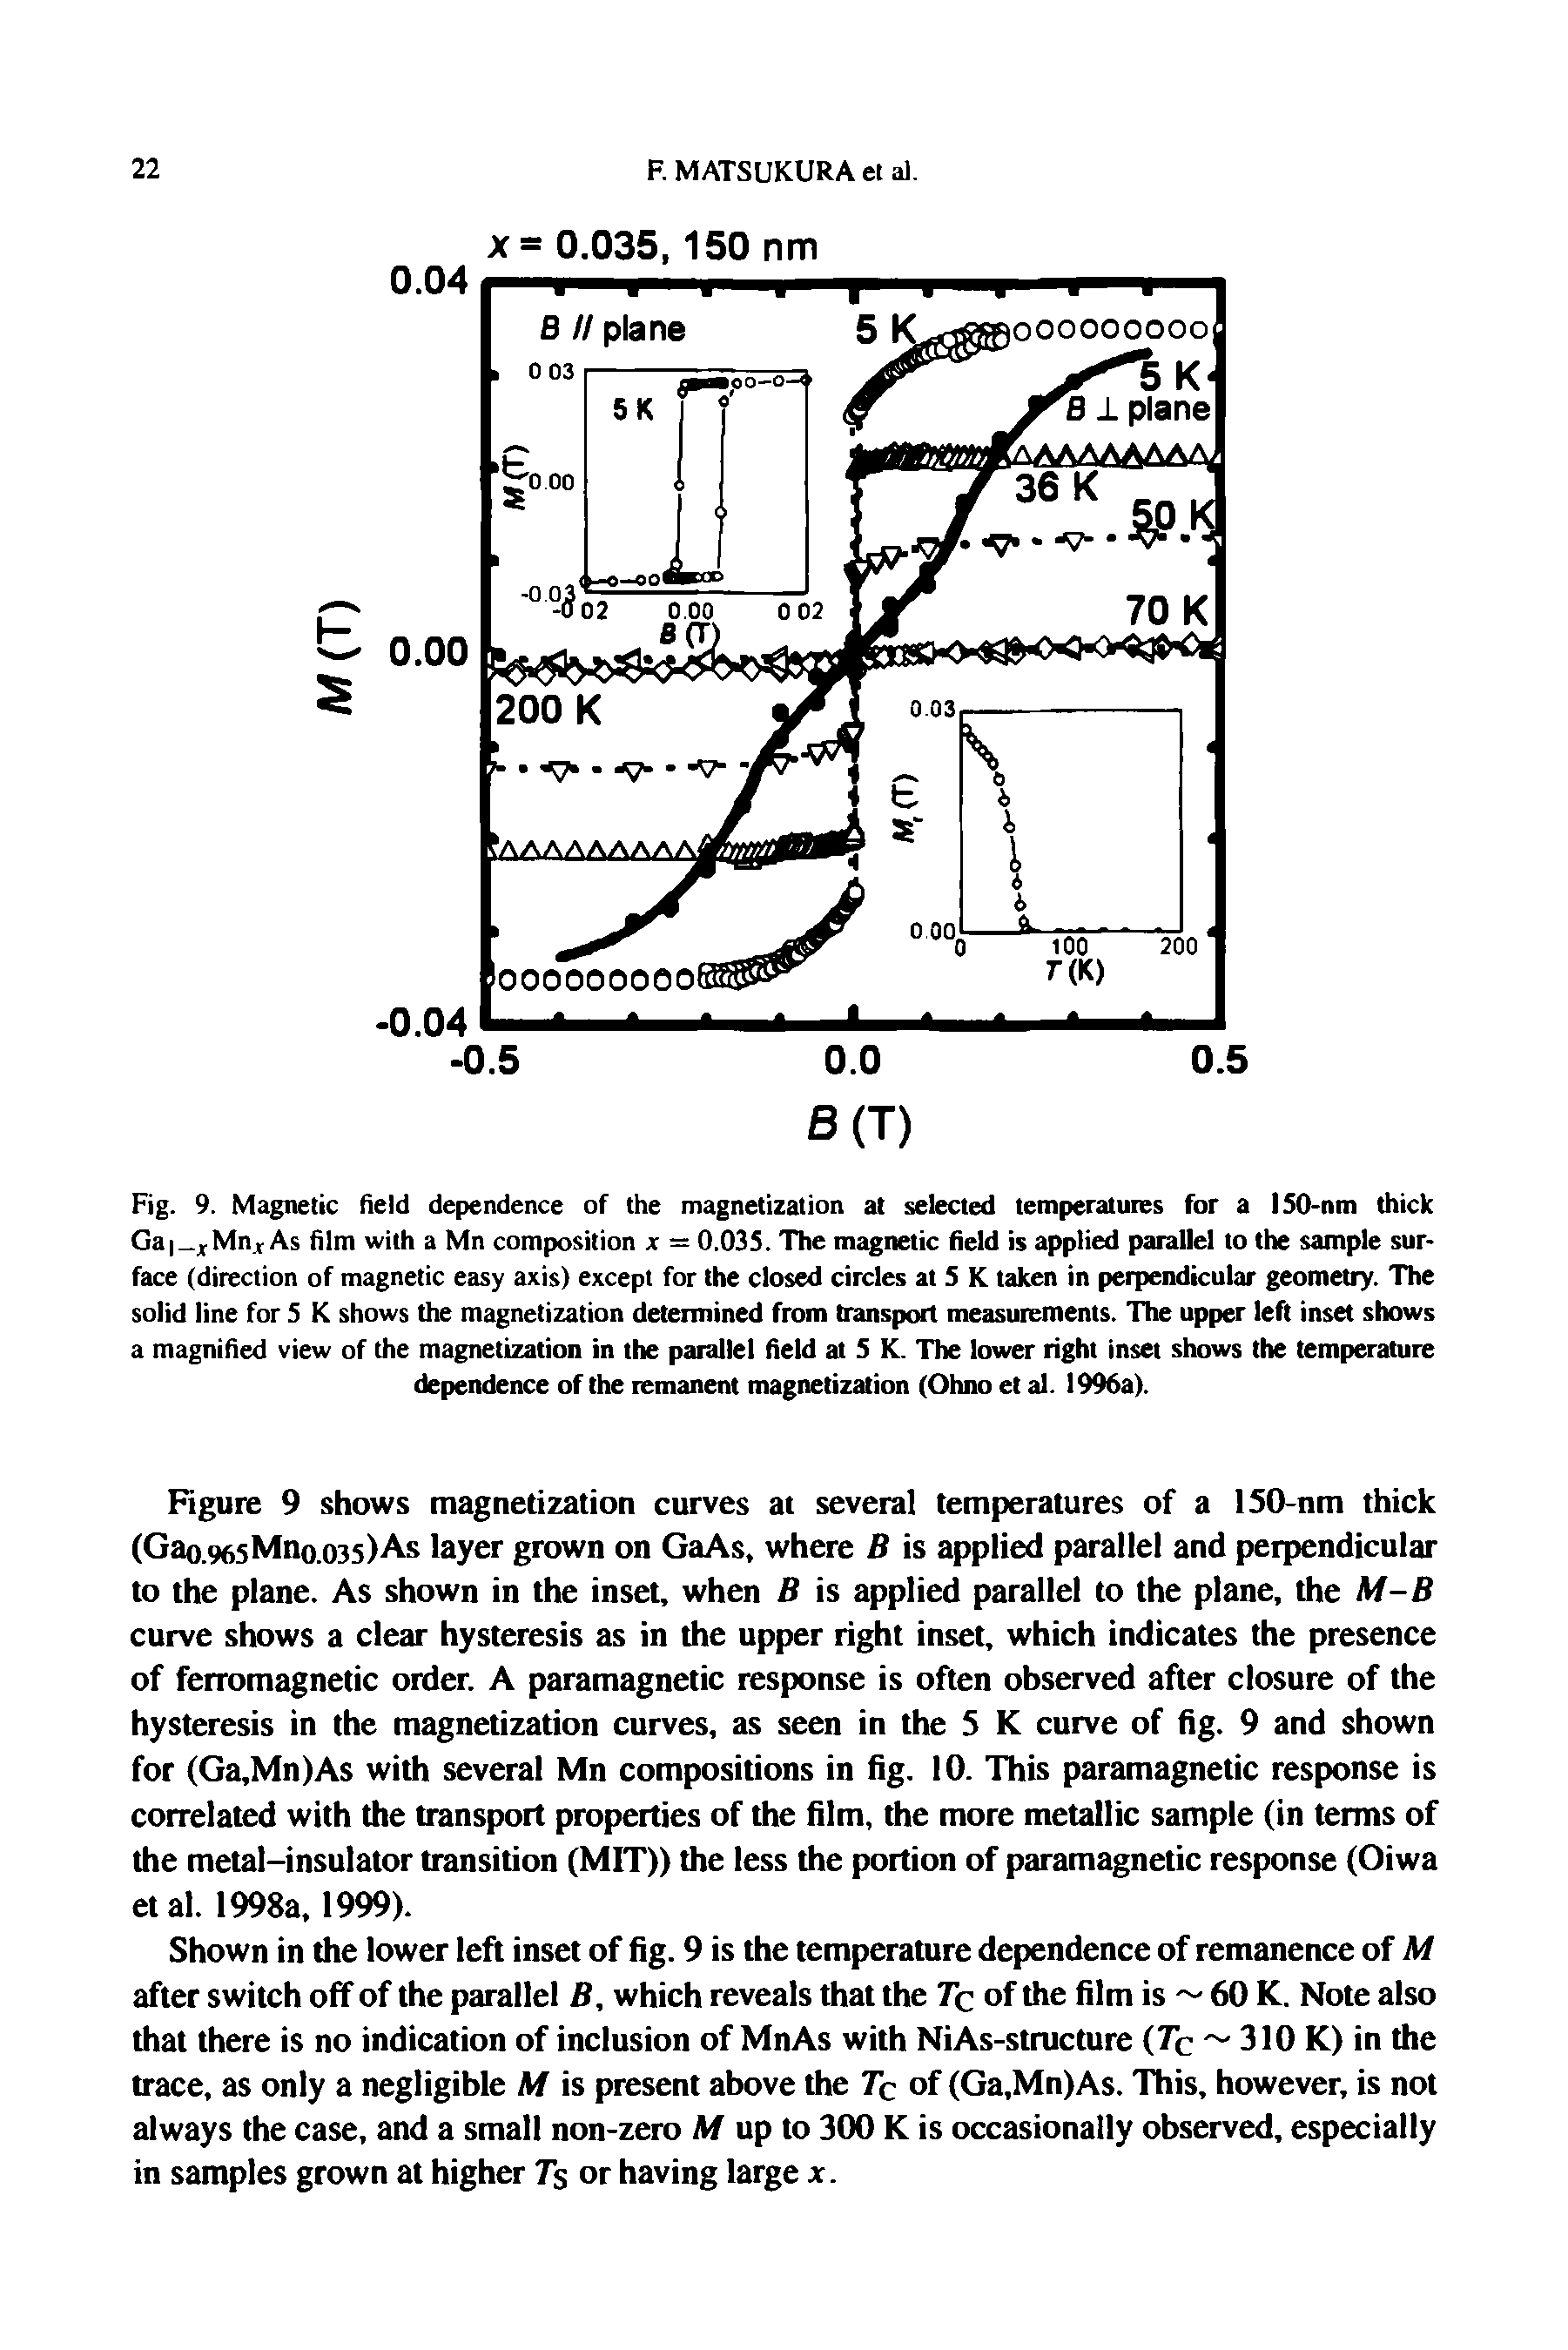 Fig. 9. Magnetic field dependence of the magnetization at selected temperatures for a 150-nm thick Ga xMn As film with a Mn composition x = 0.03S. The magnetic field is applied parallel to the sample surface (direction of magnetic easy axis) except for the closed circles at 5 K taken in perpendicular geometry. The solid line for S K shows the magnetization determined from transport measurements. The upper left inset shows a magnified view of the magnetization in the parallel field at 5 K. The lower right inset shows the temperature dependence of the remanent magnetization (Ohno et al. 1996a).